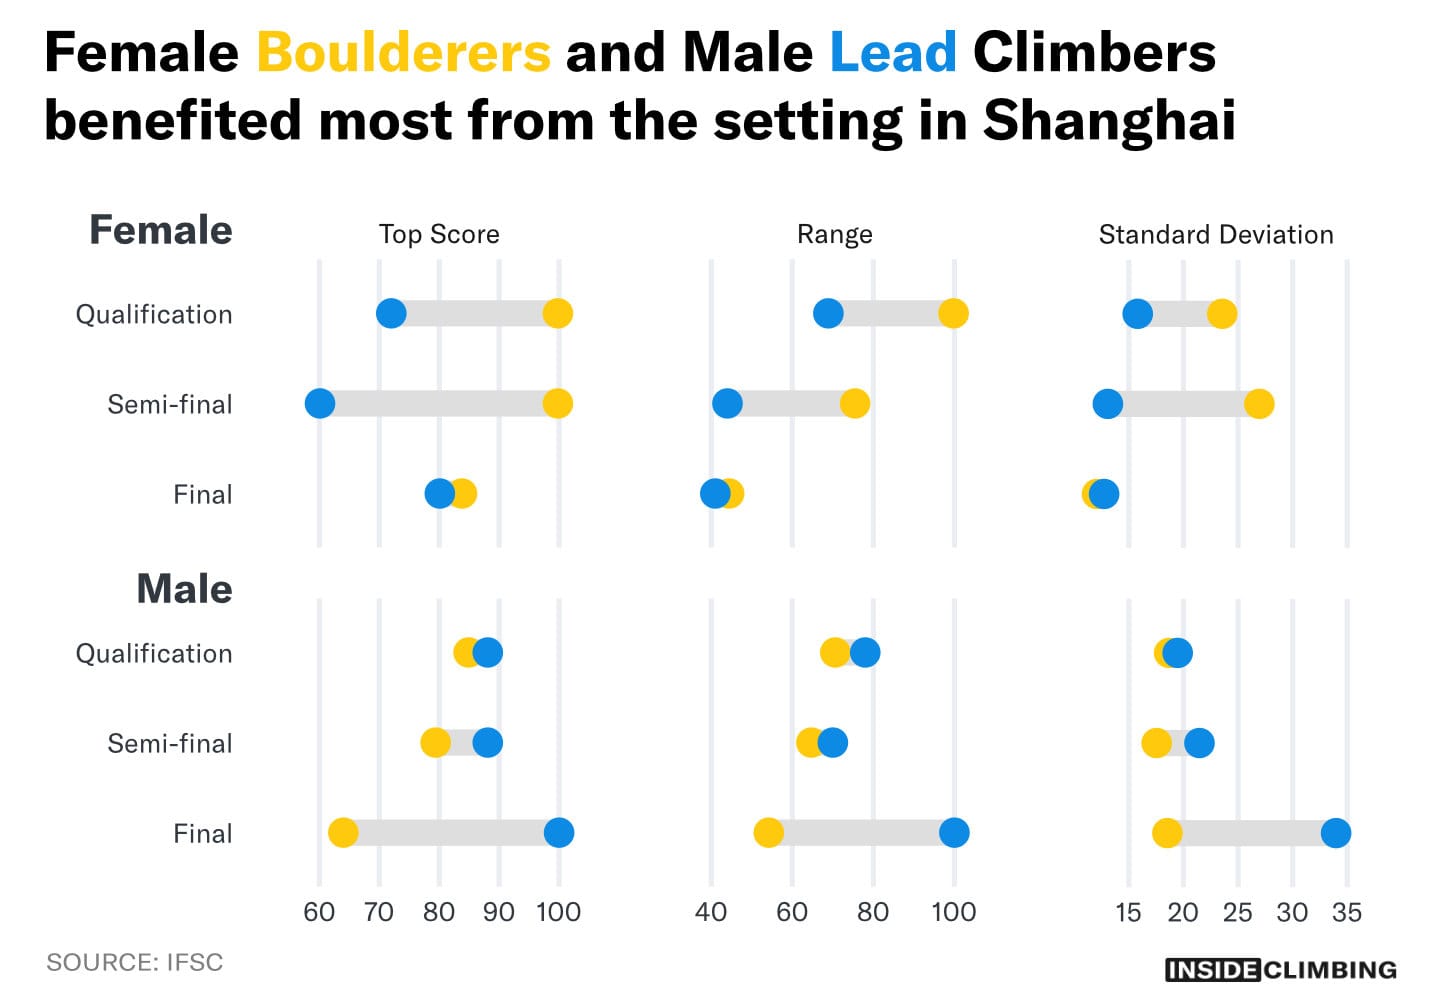 Who Benefitted from the Routesetting at the Shanghai OQS in Boulder&Lead?